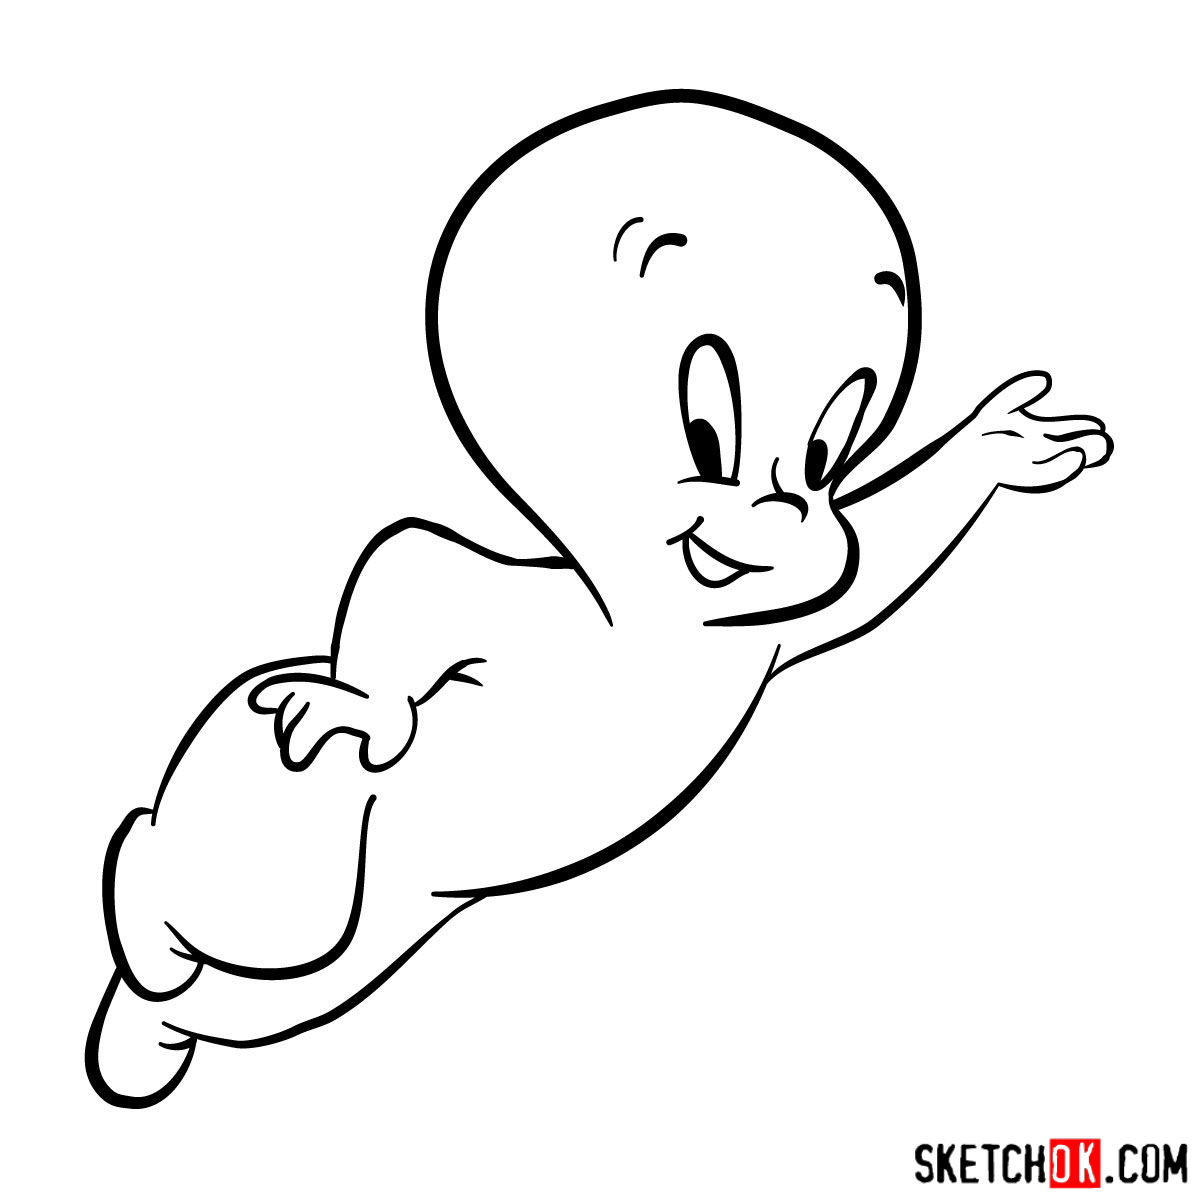 Top How To Draw Casper The Friendly Ghost in the world Check it out now 